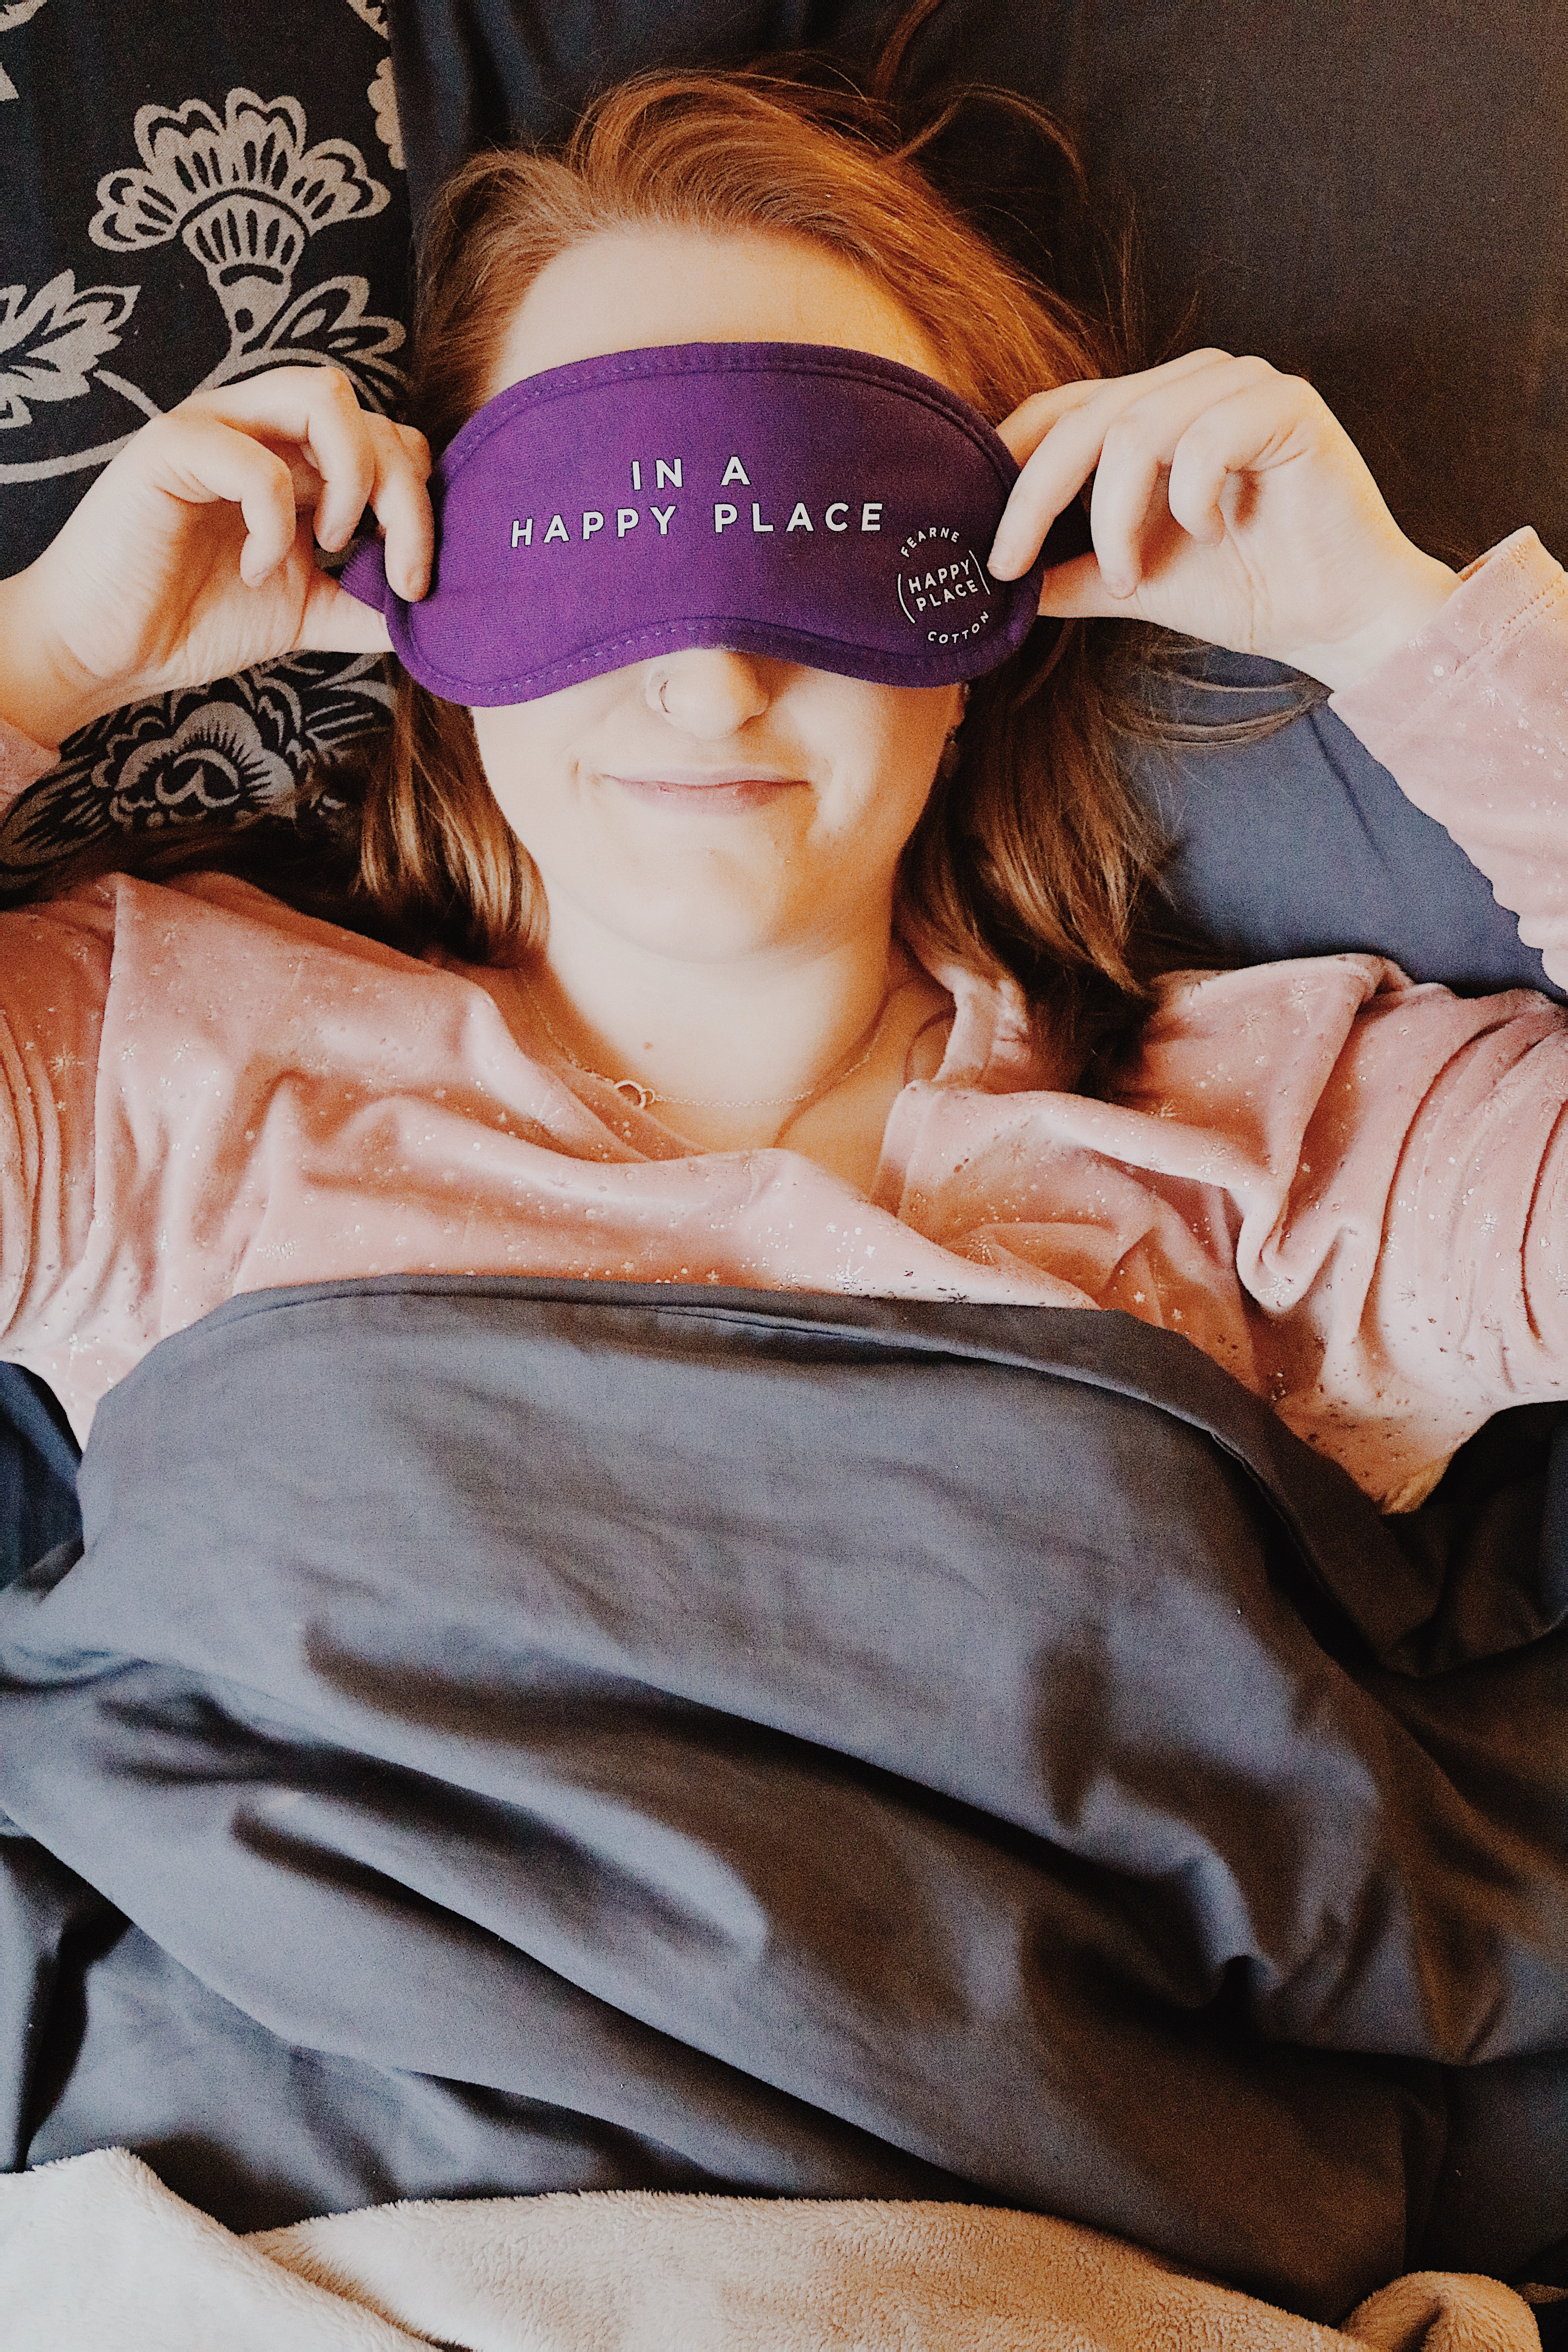 How To Switch Off and Relax: A girl laying in bed under the covers wearing a sleeping mask saying "In my happy place"